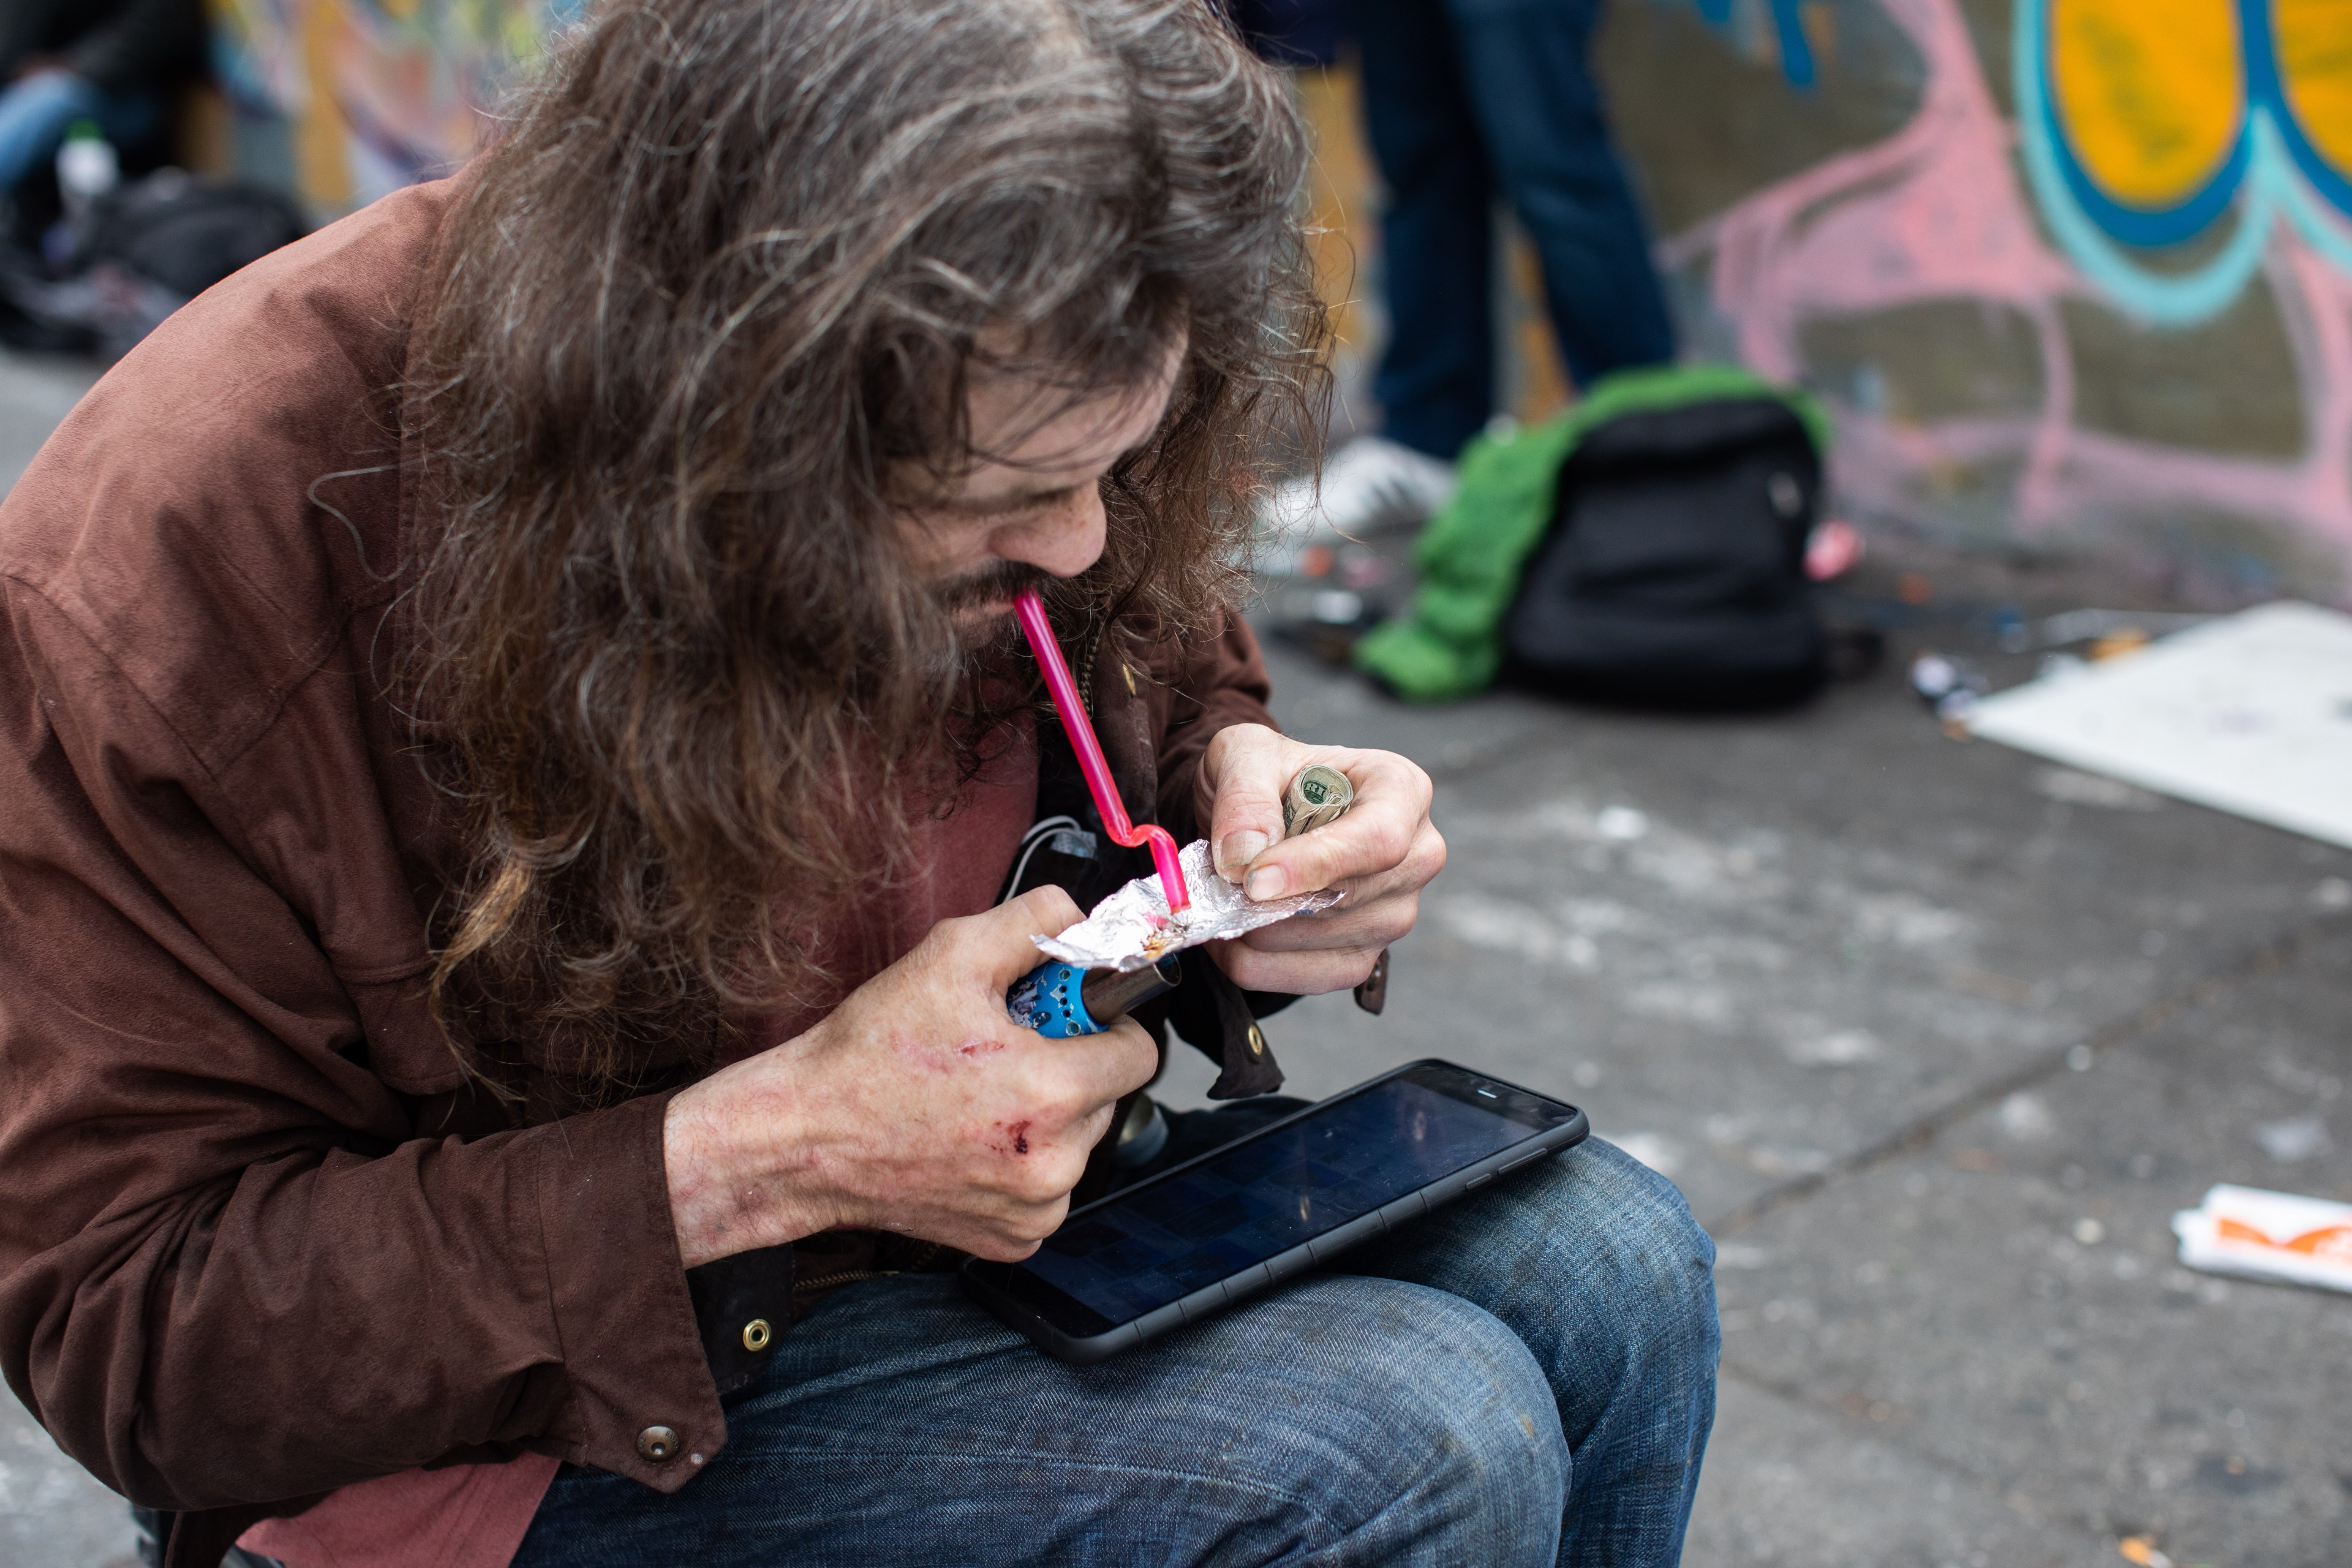 A man is hunched over, using a straw on a device in his hand, with graffiti and items in the background.